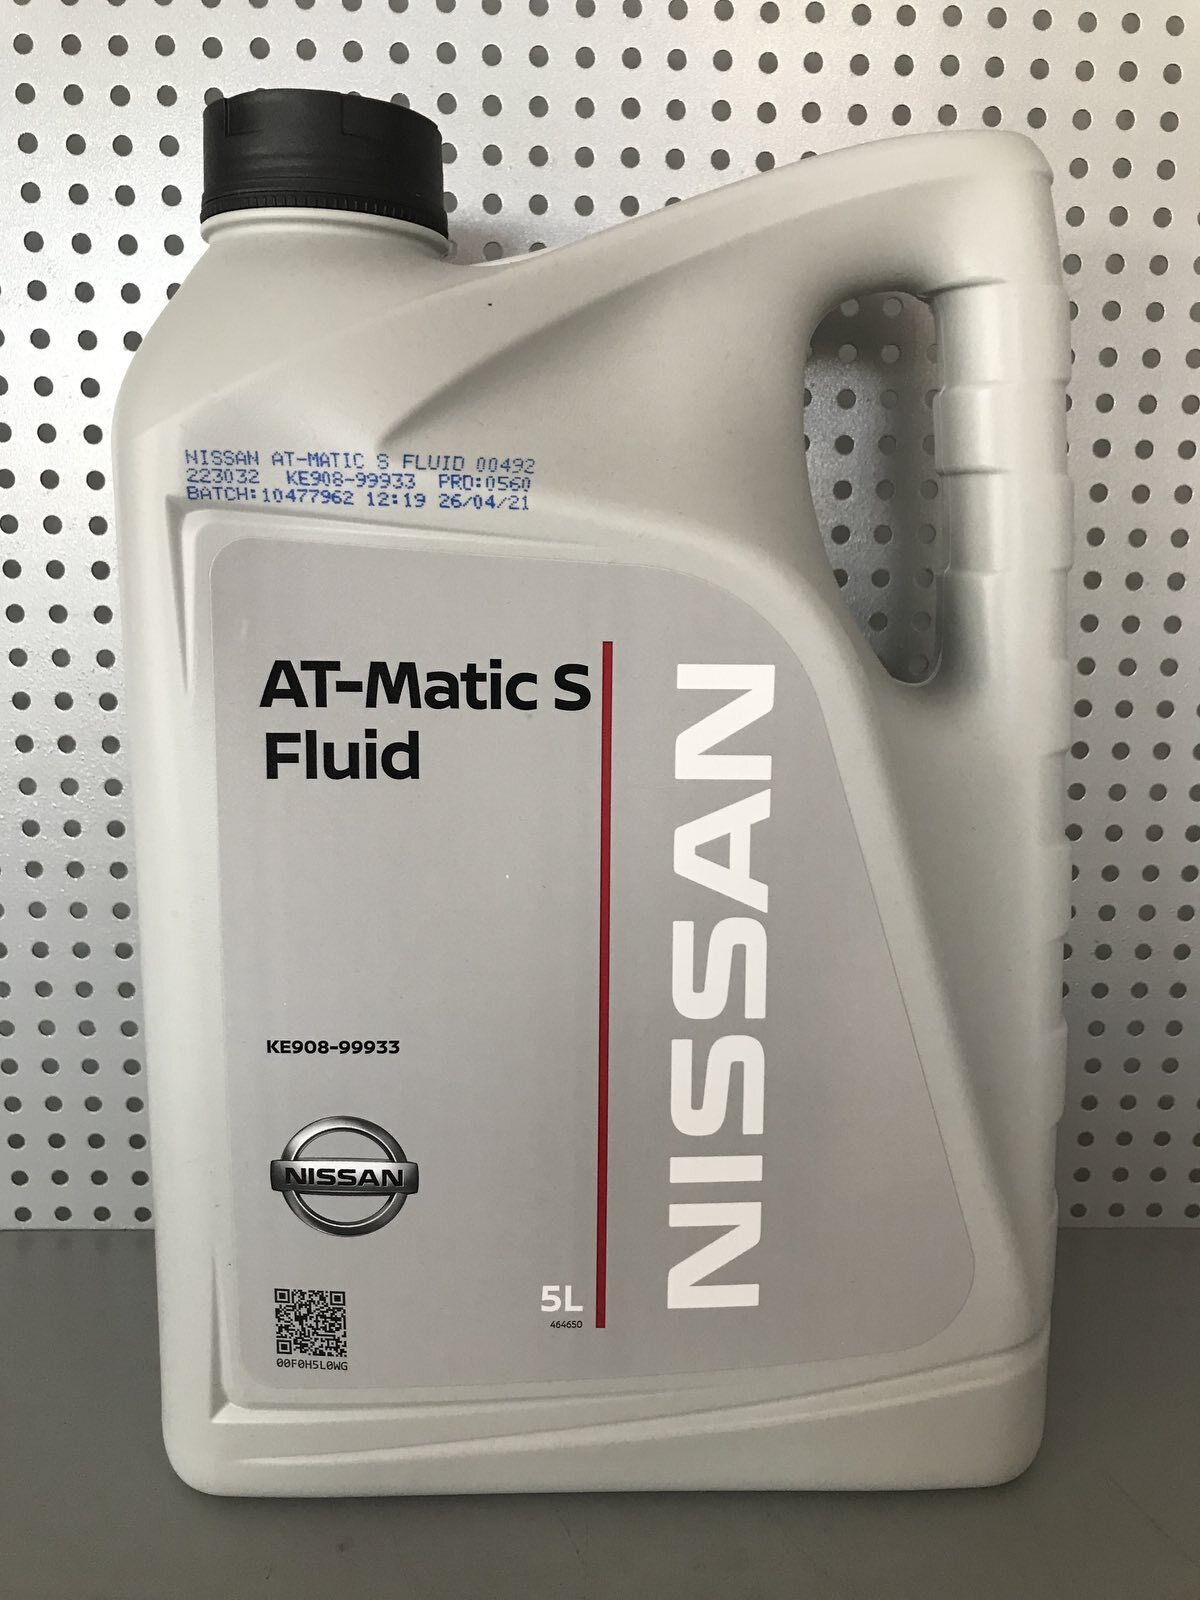 Масло nissan atf. Nissan ATF matic-s. Масло Nissan matic s 5л. Nissan ATF matic s Fluid. Nissan ATF matic s Fluid артикул.